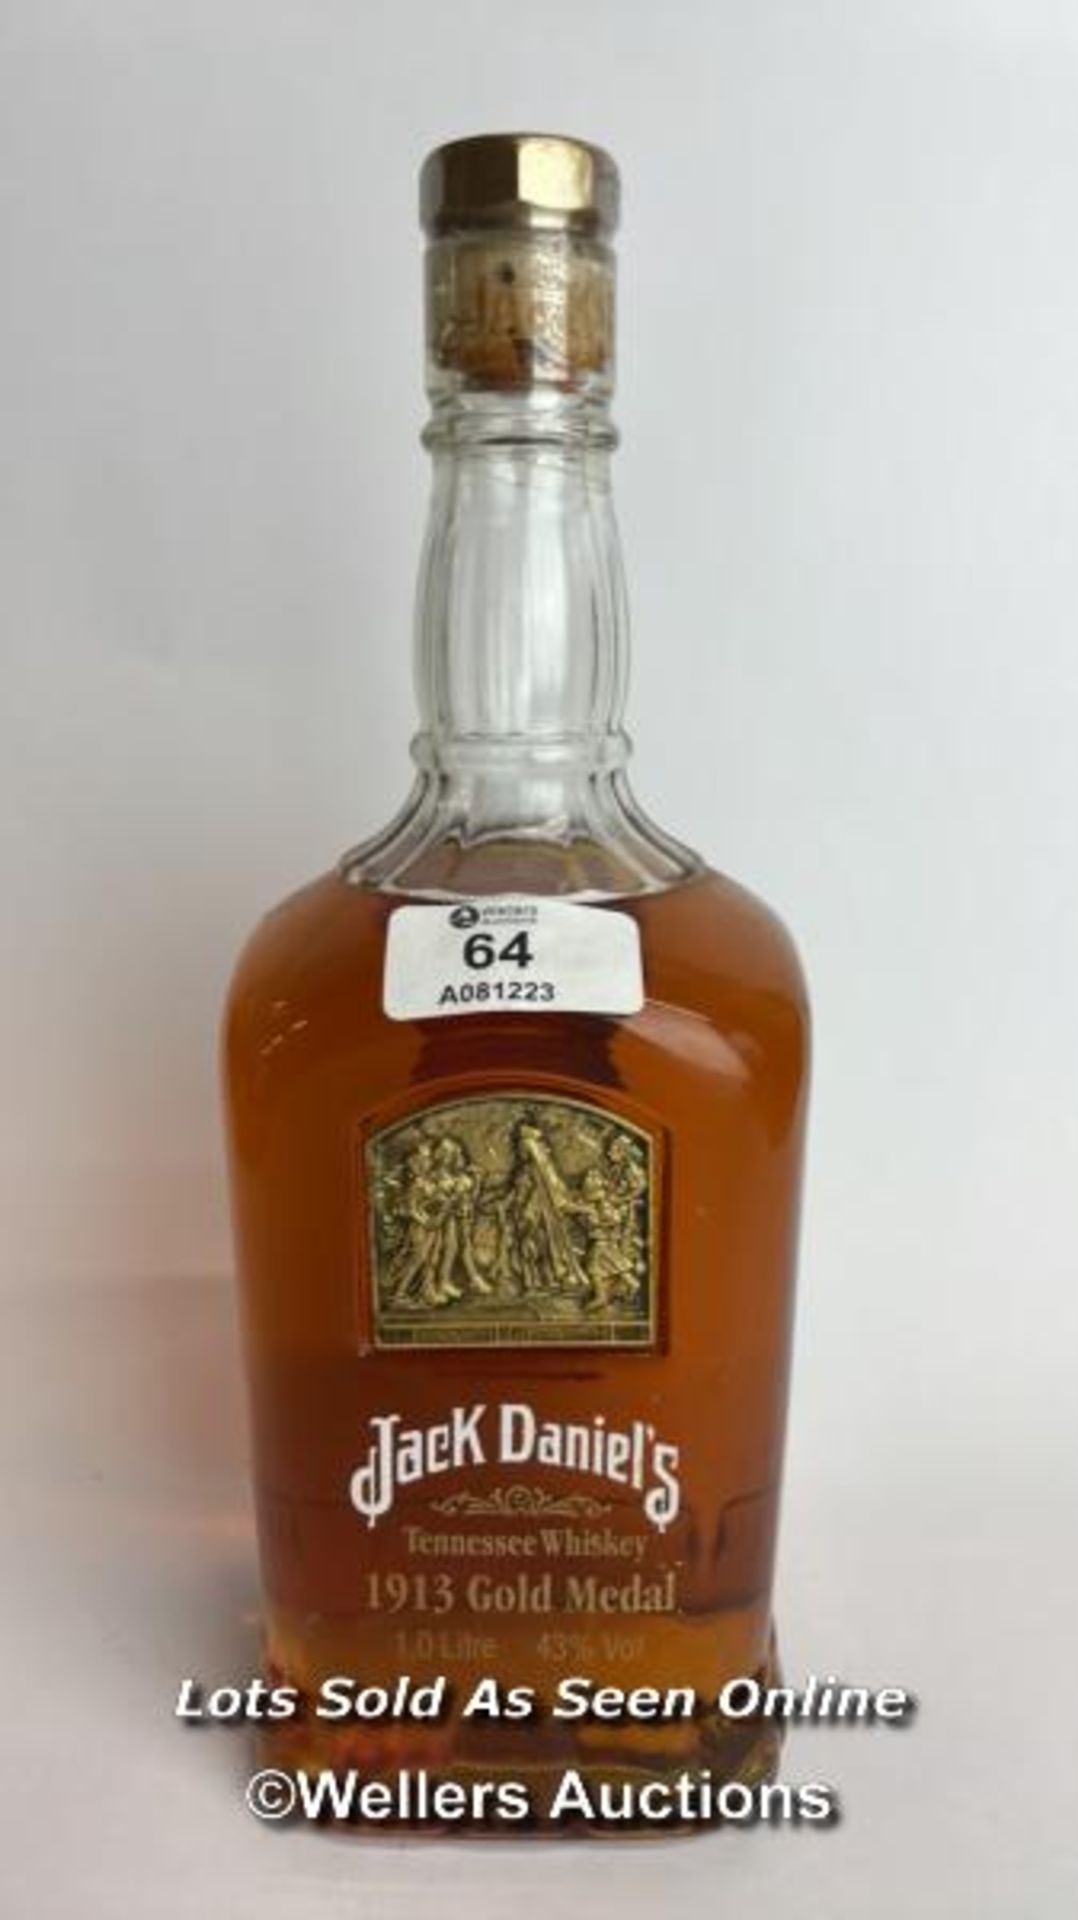 1913 Jack Daniels Tennesse Whiskey Gold Medal, 75cl, 43% vol / Please see images for fill level